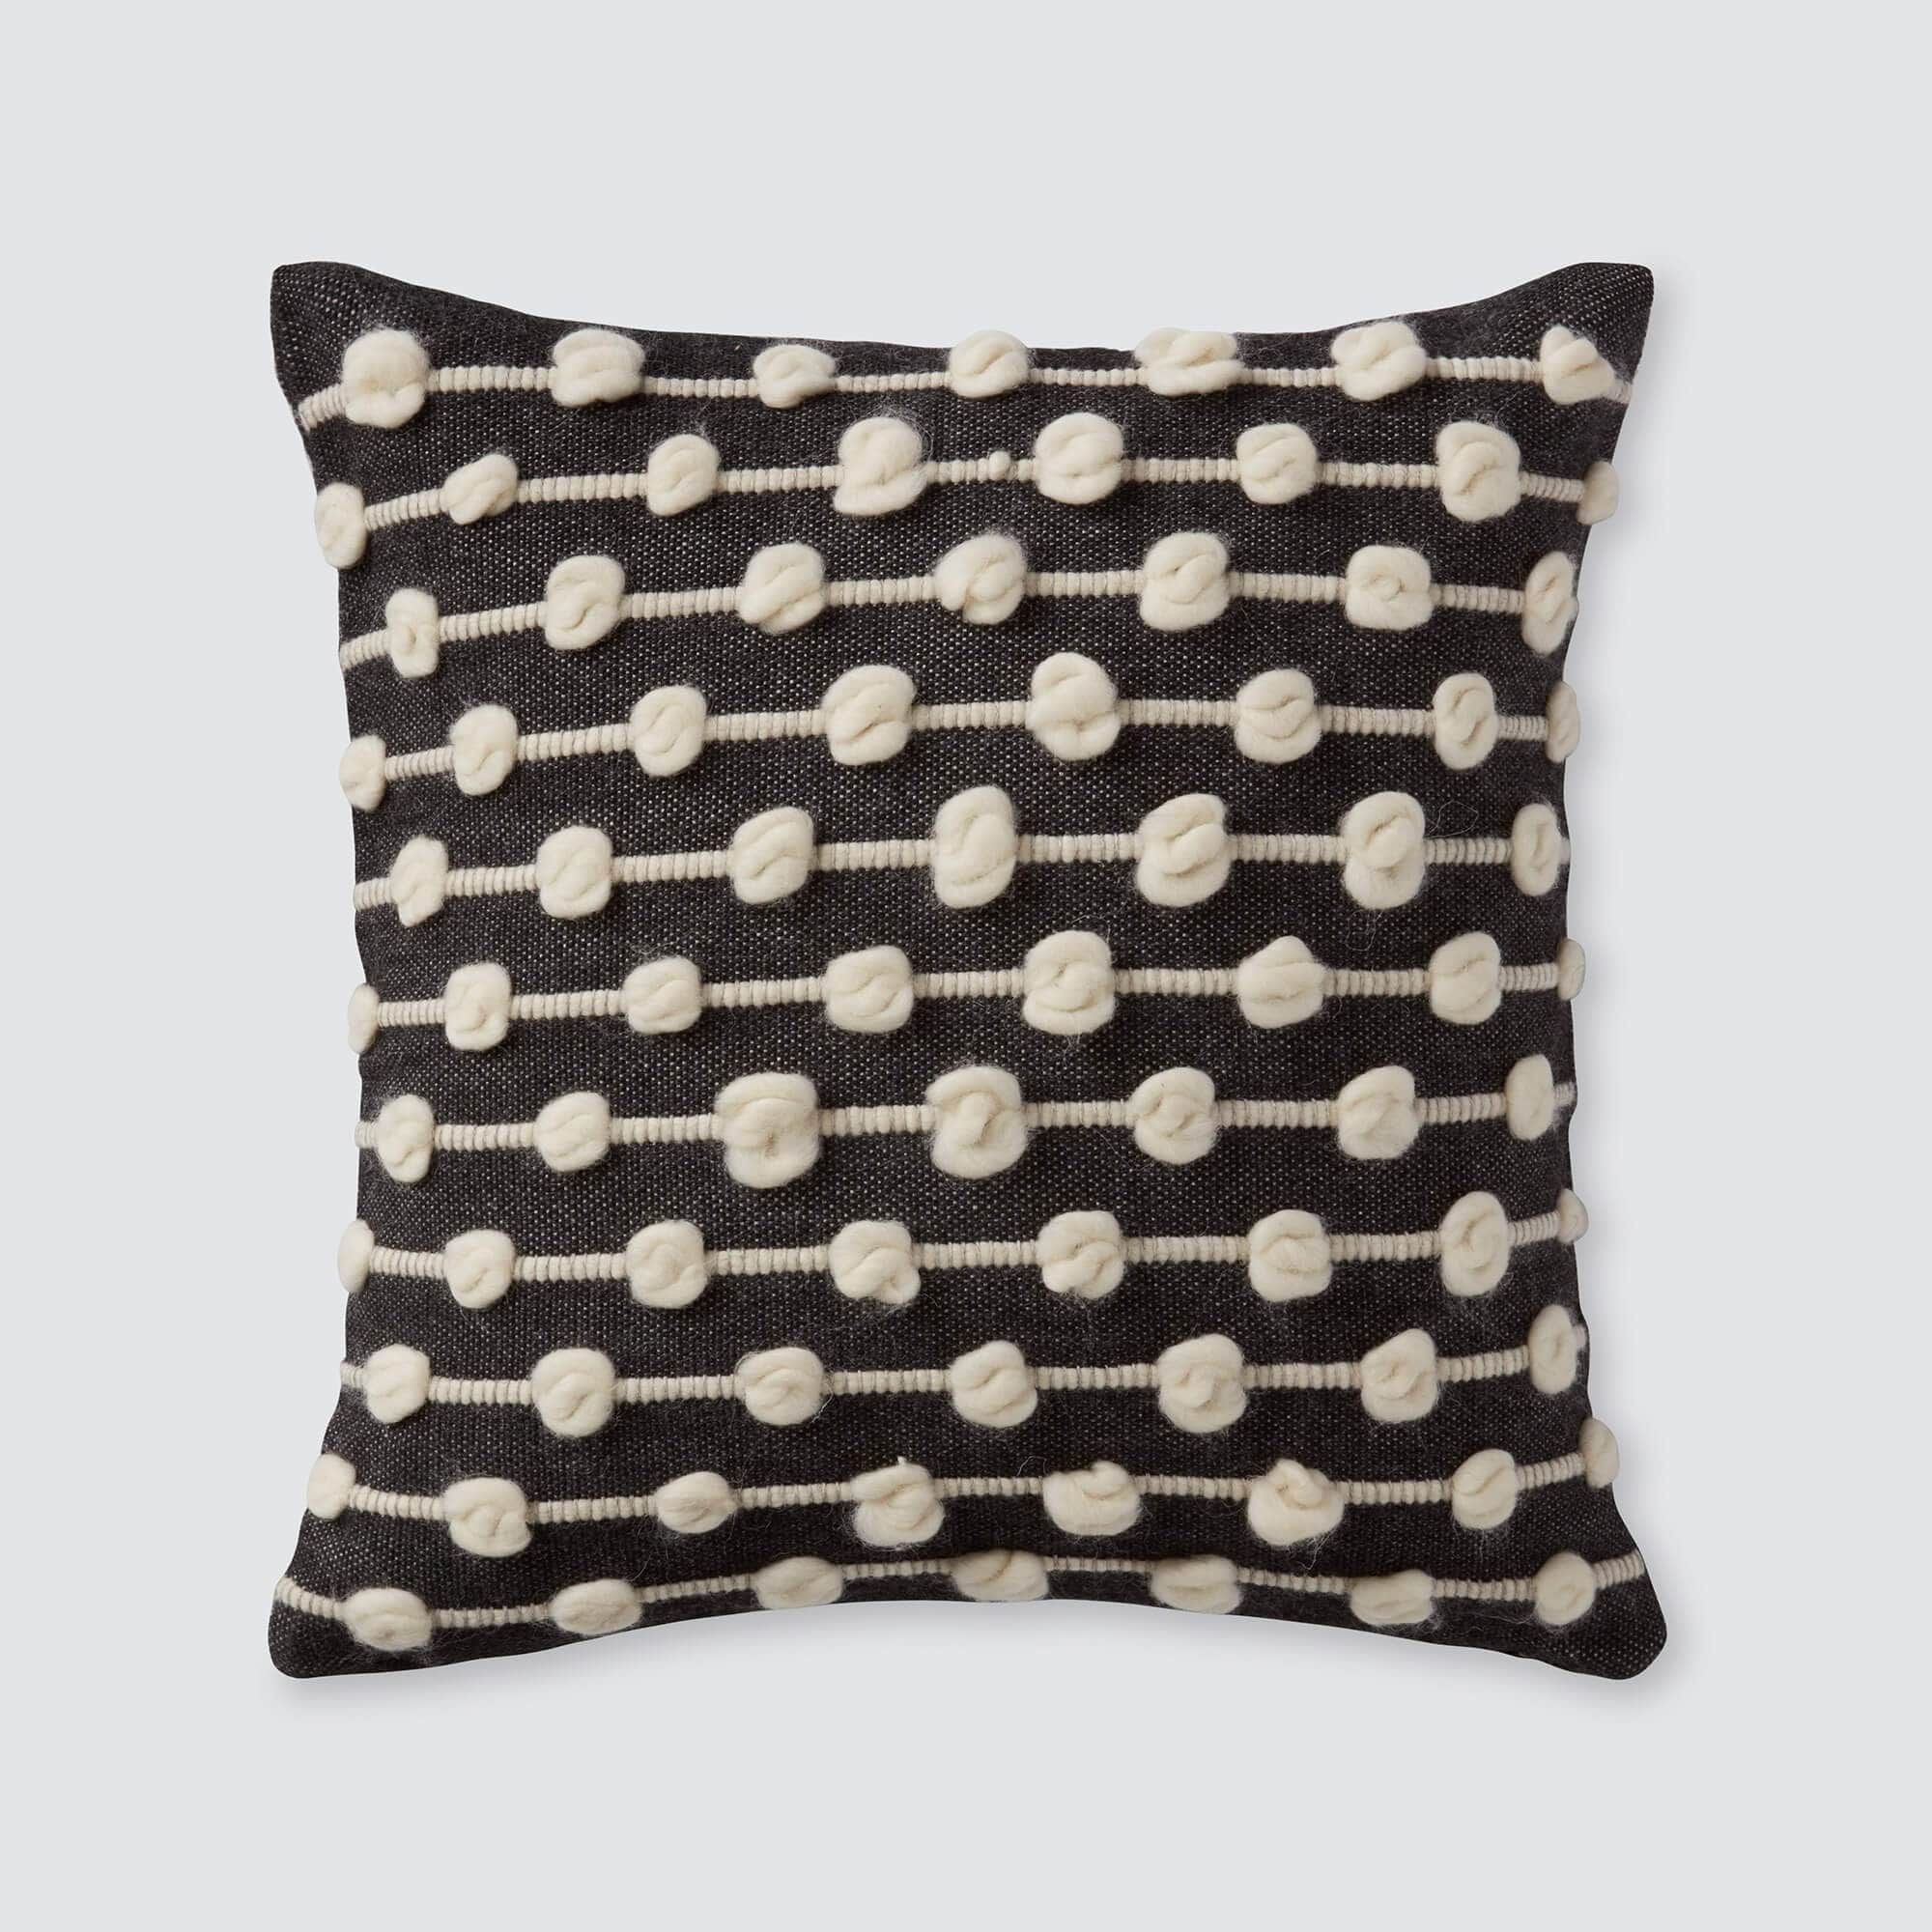 Modern Wool Throw Pillows | Ethically Made in Peru   – The Citizenry | The Citizenry